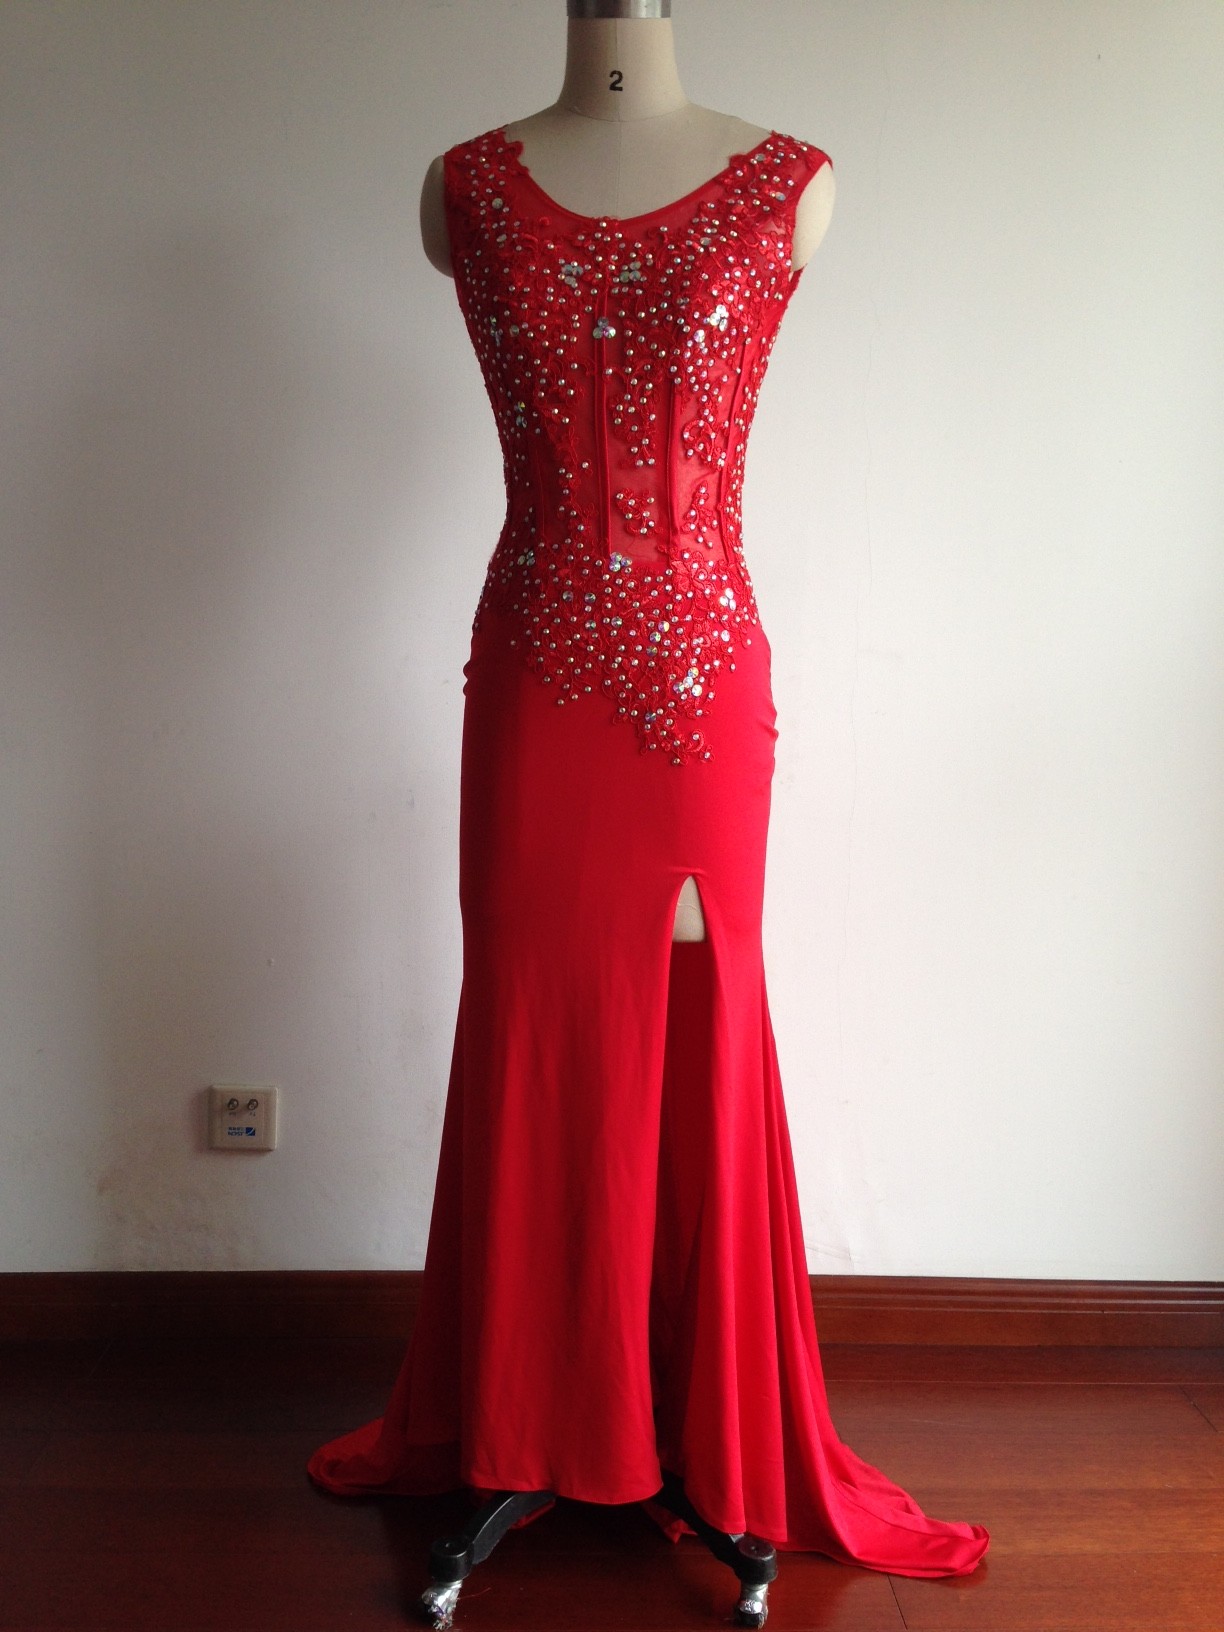 2016 Fashion Prom Dresses,red Prom Dress,slit Formal Gown,red Prom Dresses,beaded Evening Gowns,sexy Formal Gown For Teen